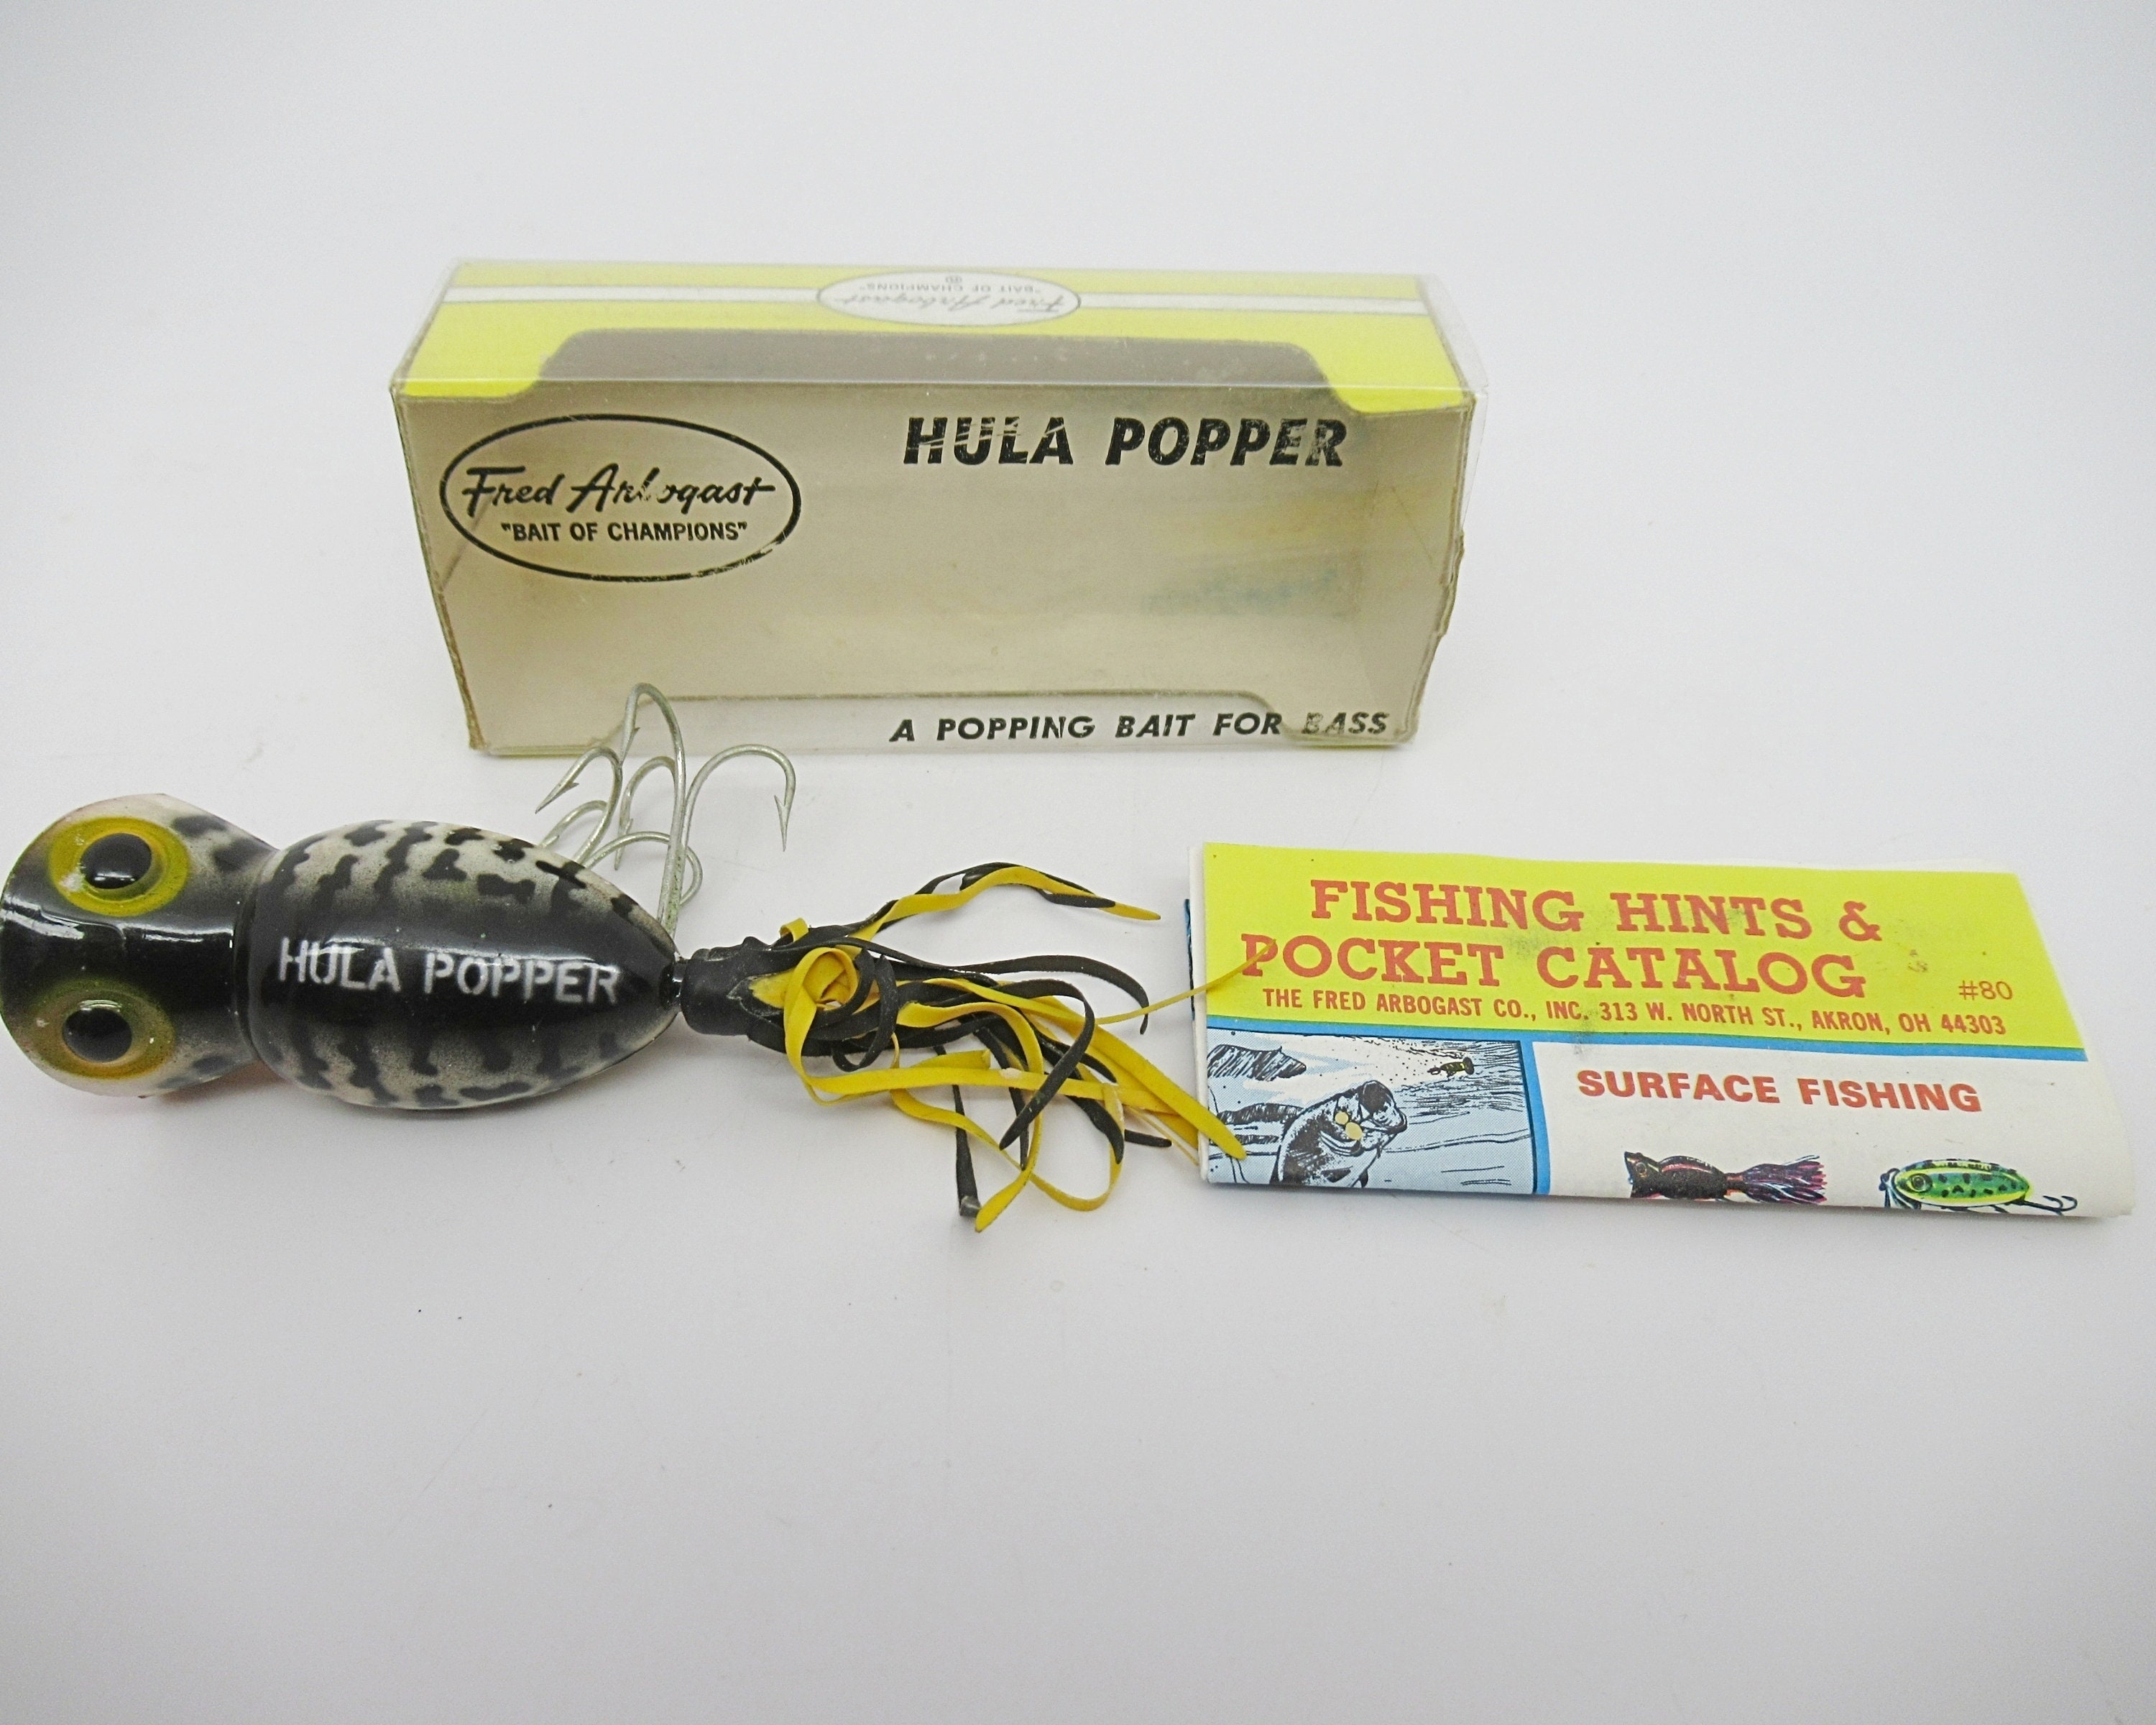 Fred Arbogast Hula Popper Lure In Original Box W/ Fishing Hints & Pocket  Catalog 